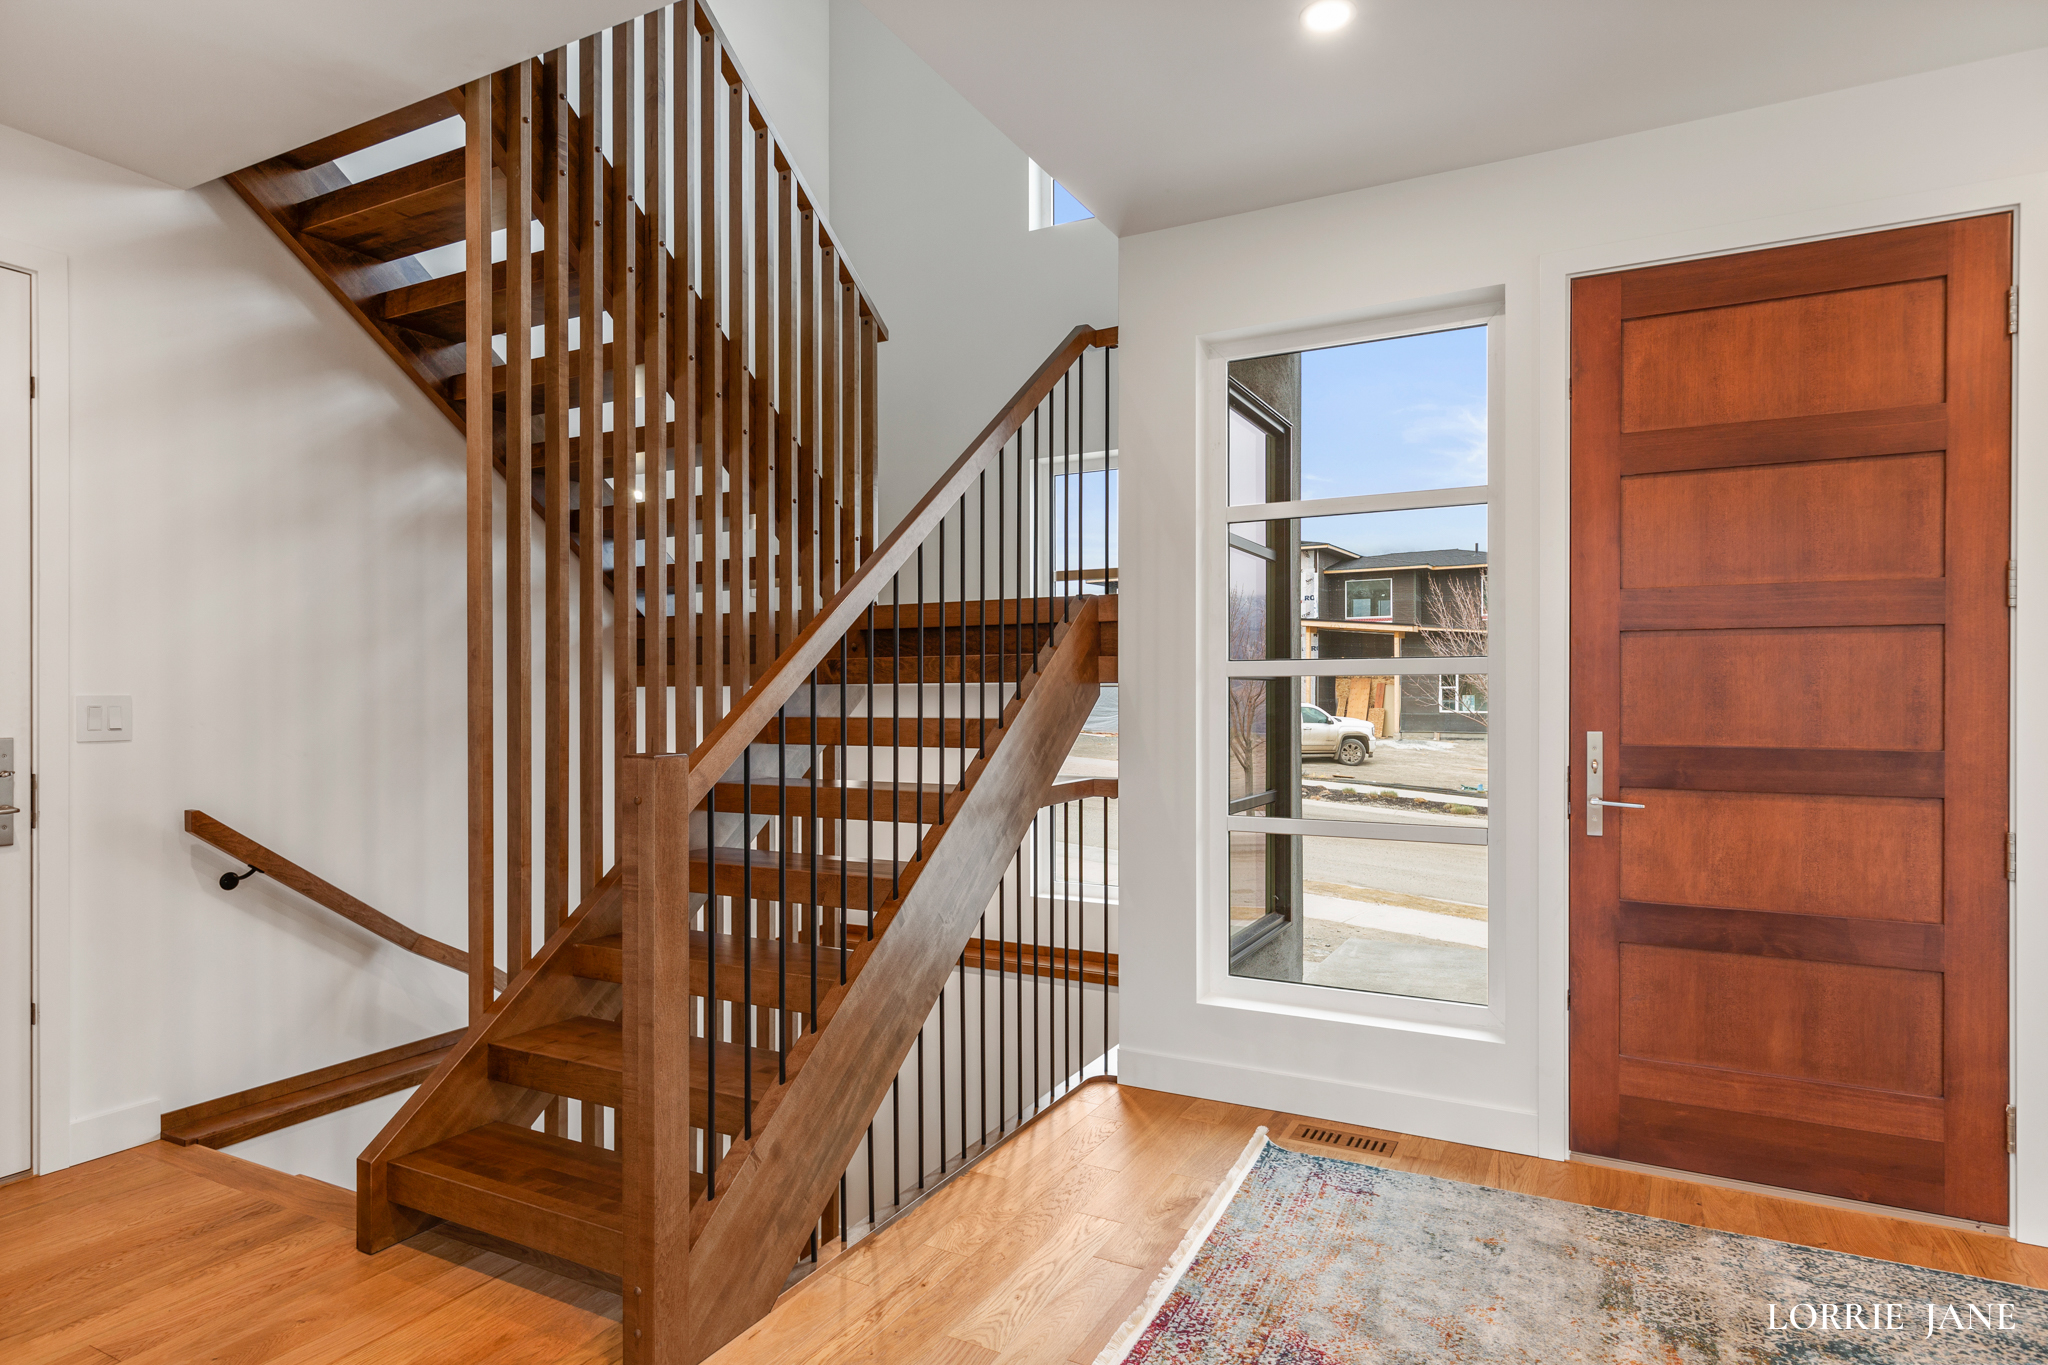 Check out this custom designed staircase by 7 Points Millworks.  Tobiano living ...

#carpentry#woodworking #shop #modern #wood #finish #carpentry #house #home #steps #stair #oneofakind #customcabinets#customwoodwork #design #homedesign #realestate  #picoftheday #photooftheday #instadaily #instalike #interiorphotography #luxury #luxuryhomes #firstimpression #kamloopsphotographer @dailyviewkamloops #kamloopsviews #chbabc  #canadianhomebuildersassociation
#canadianhomebuilders #architecturalmillwork #architecturalwoodwork